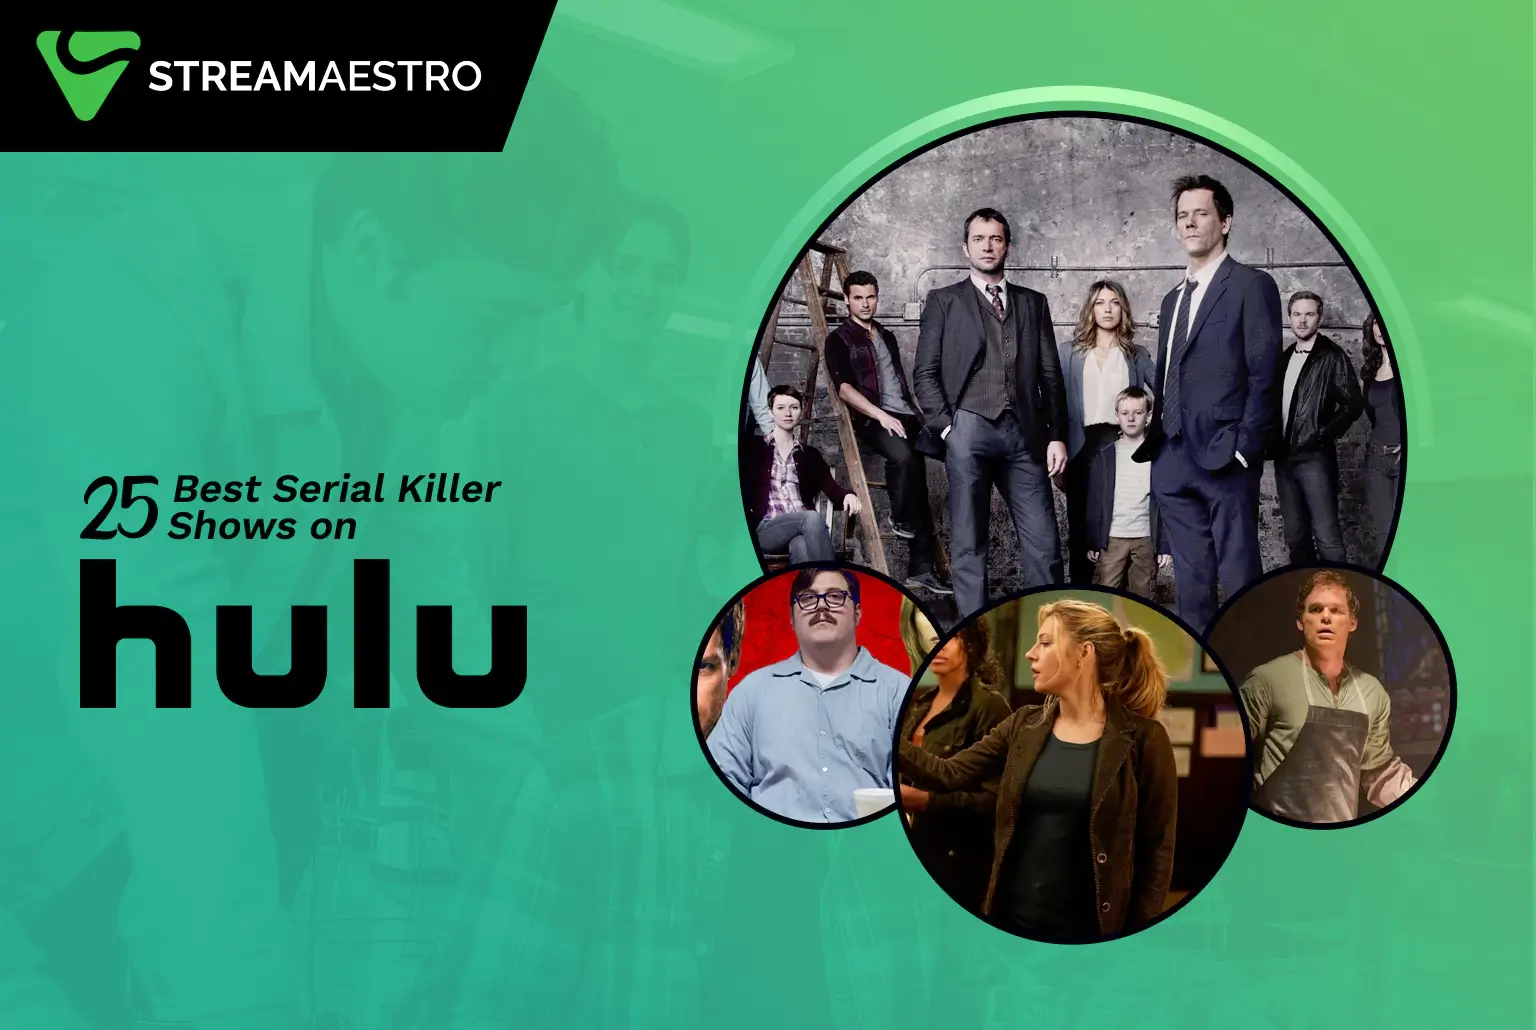 25 Best Serial Killer Shows on Hulu to Stream Right Now [February 2023]